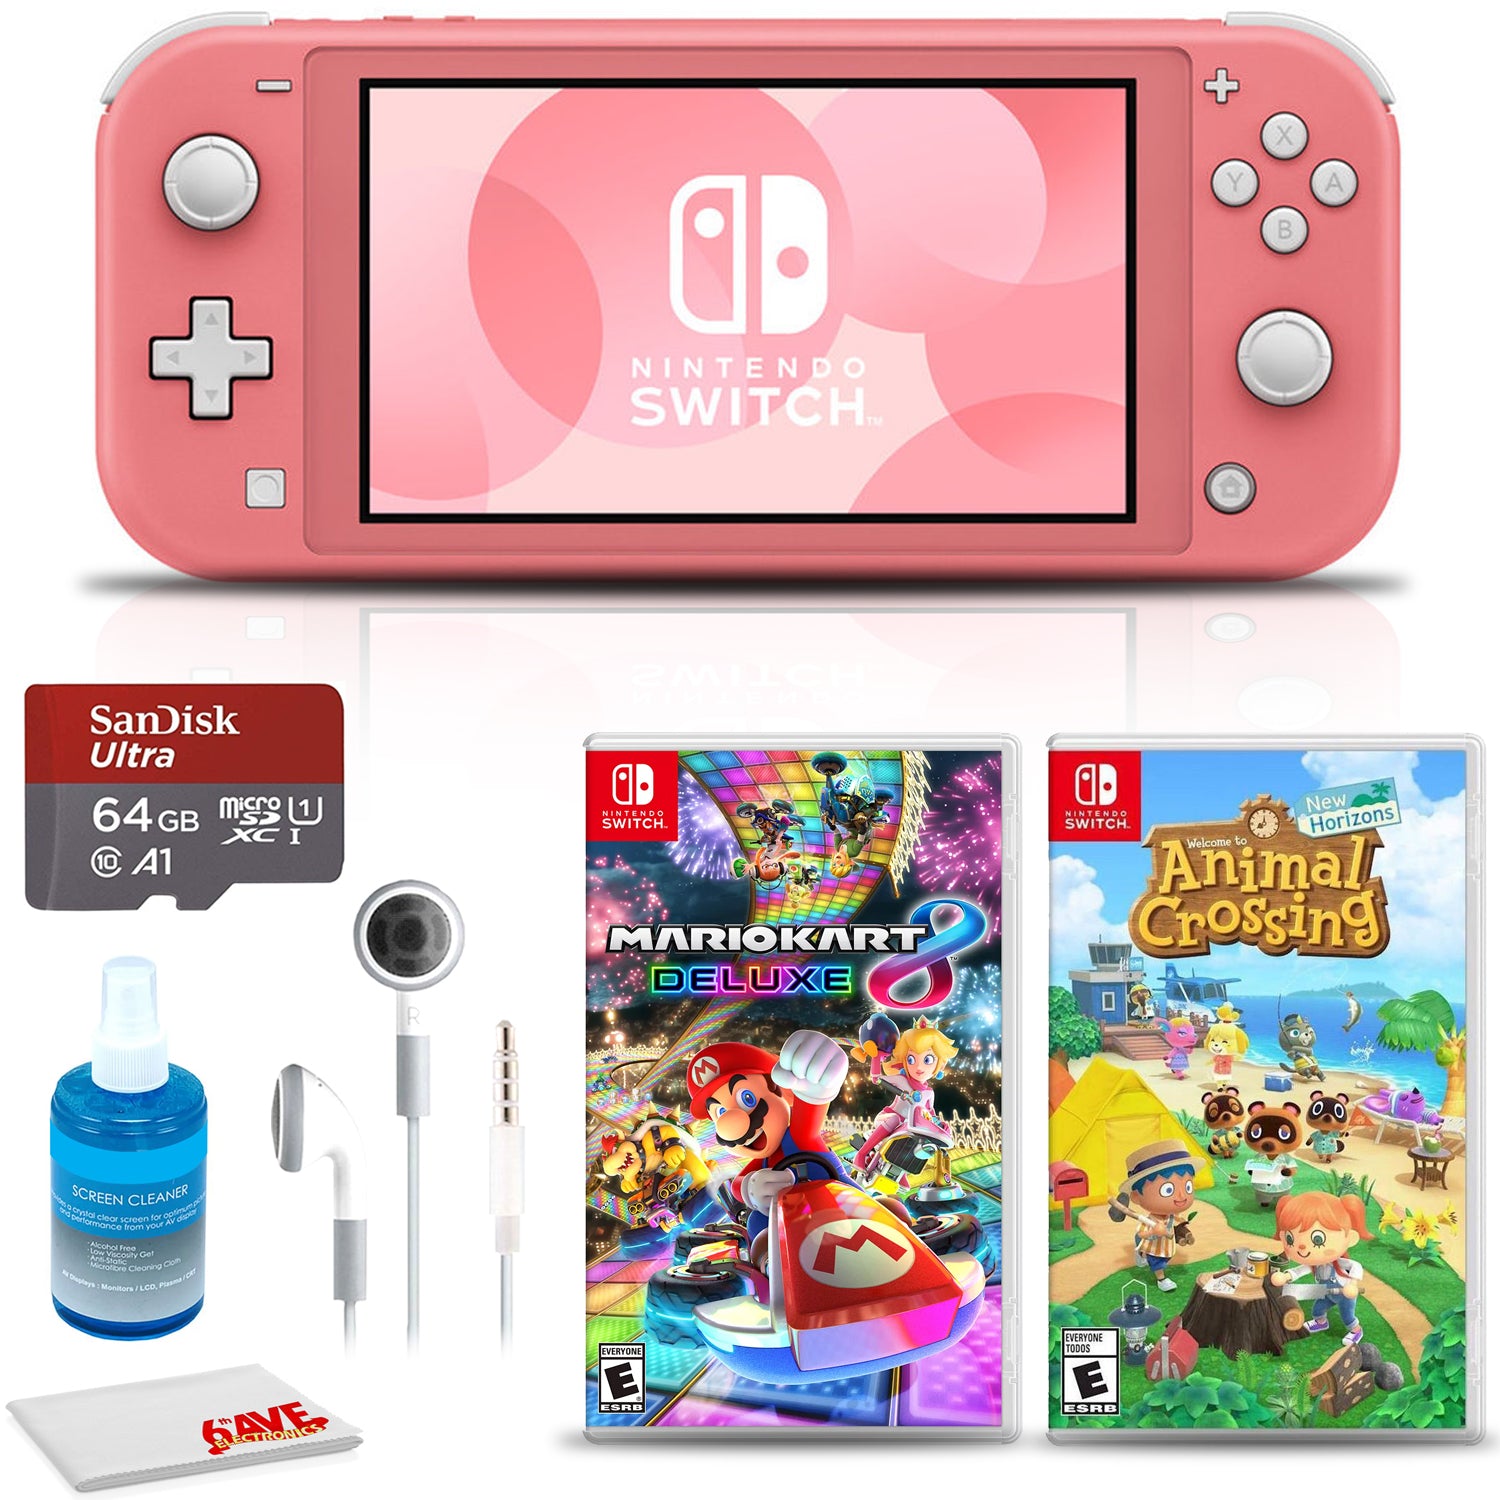 Nintendo Switch Lite (Coral) with Animal Crossing + Mario Kart + 64GB Memory + More